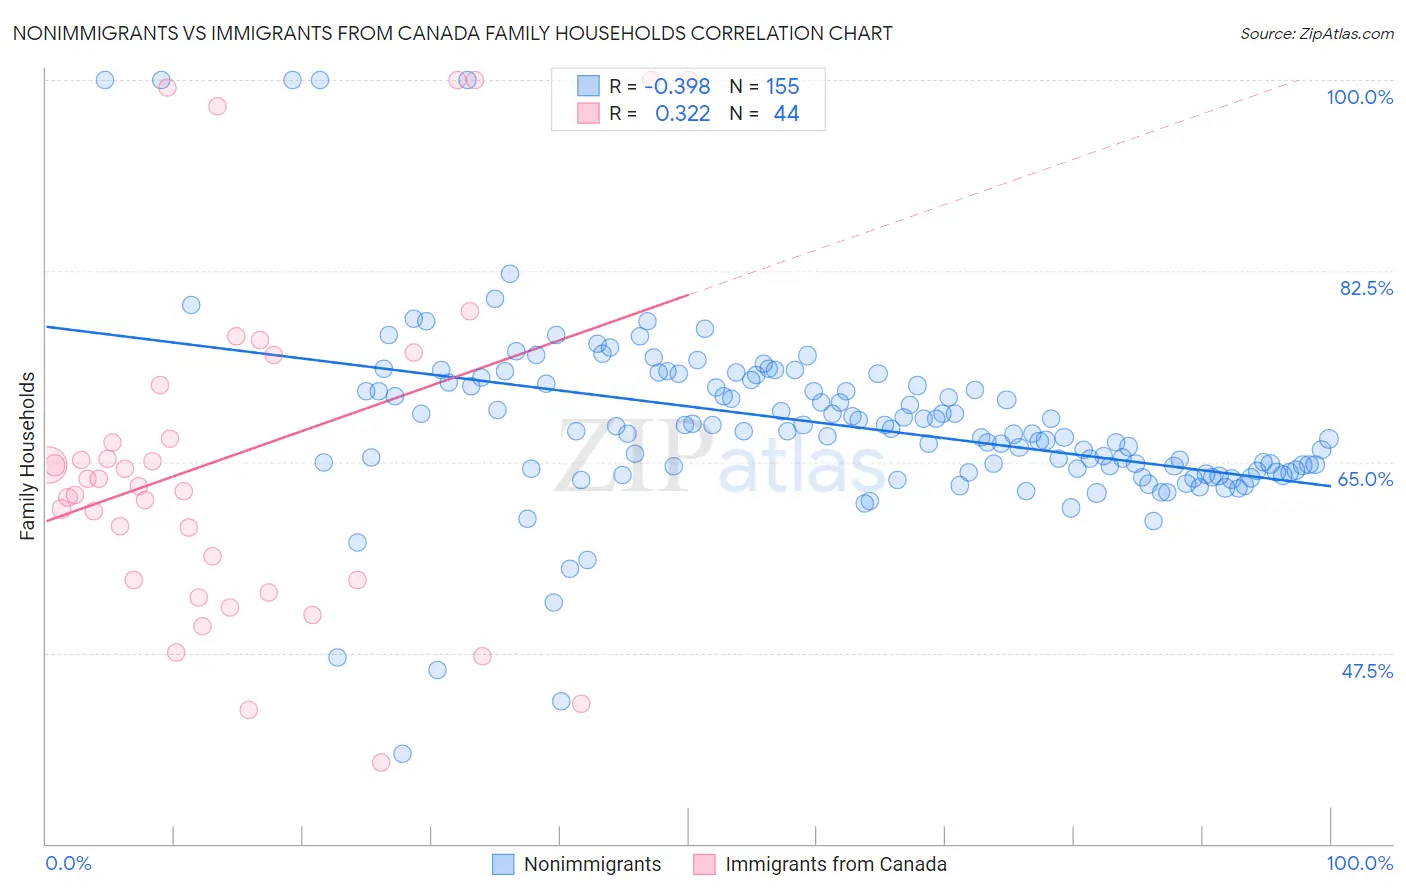 Nonimmigrants vs Immigrants from Canada Family Households